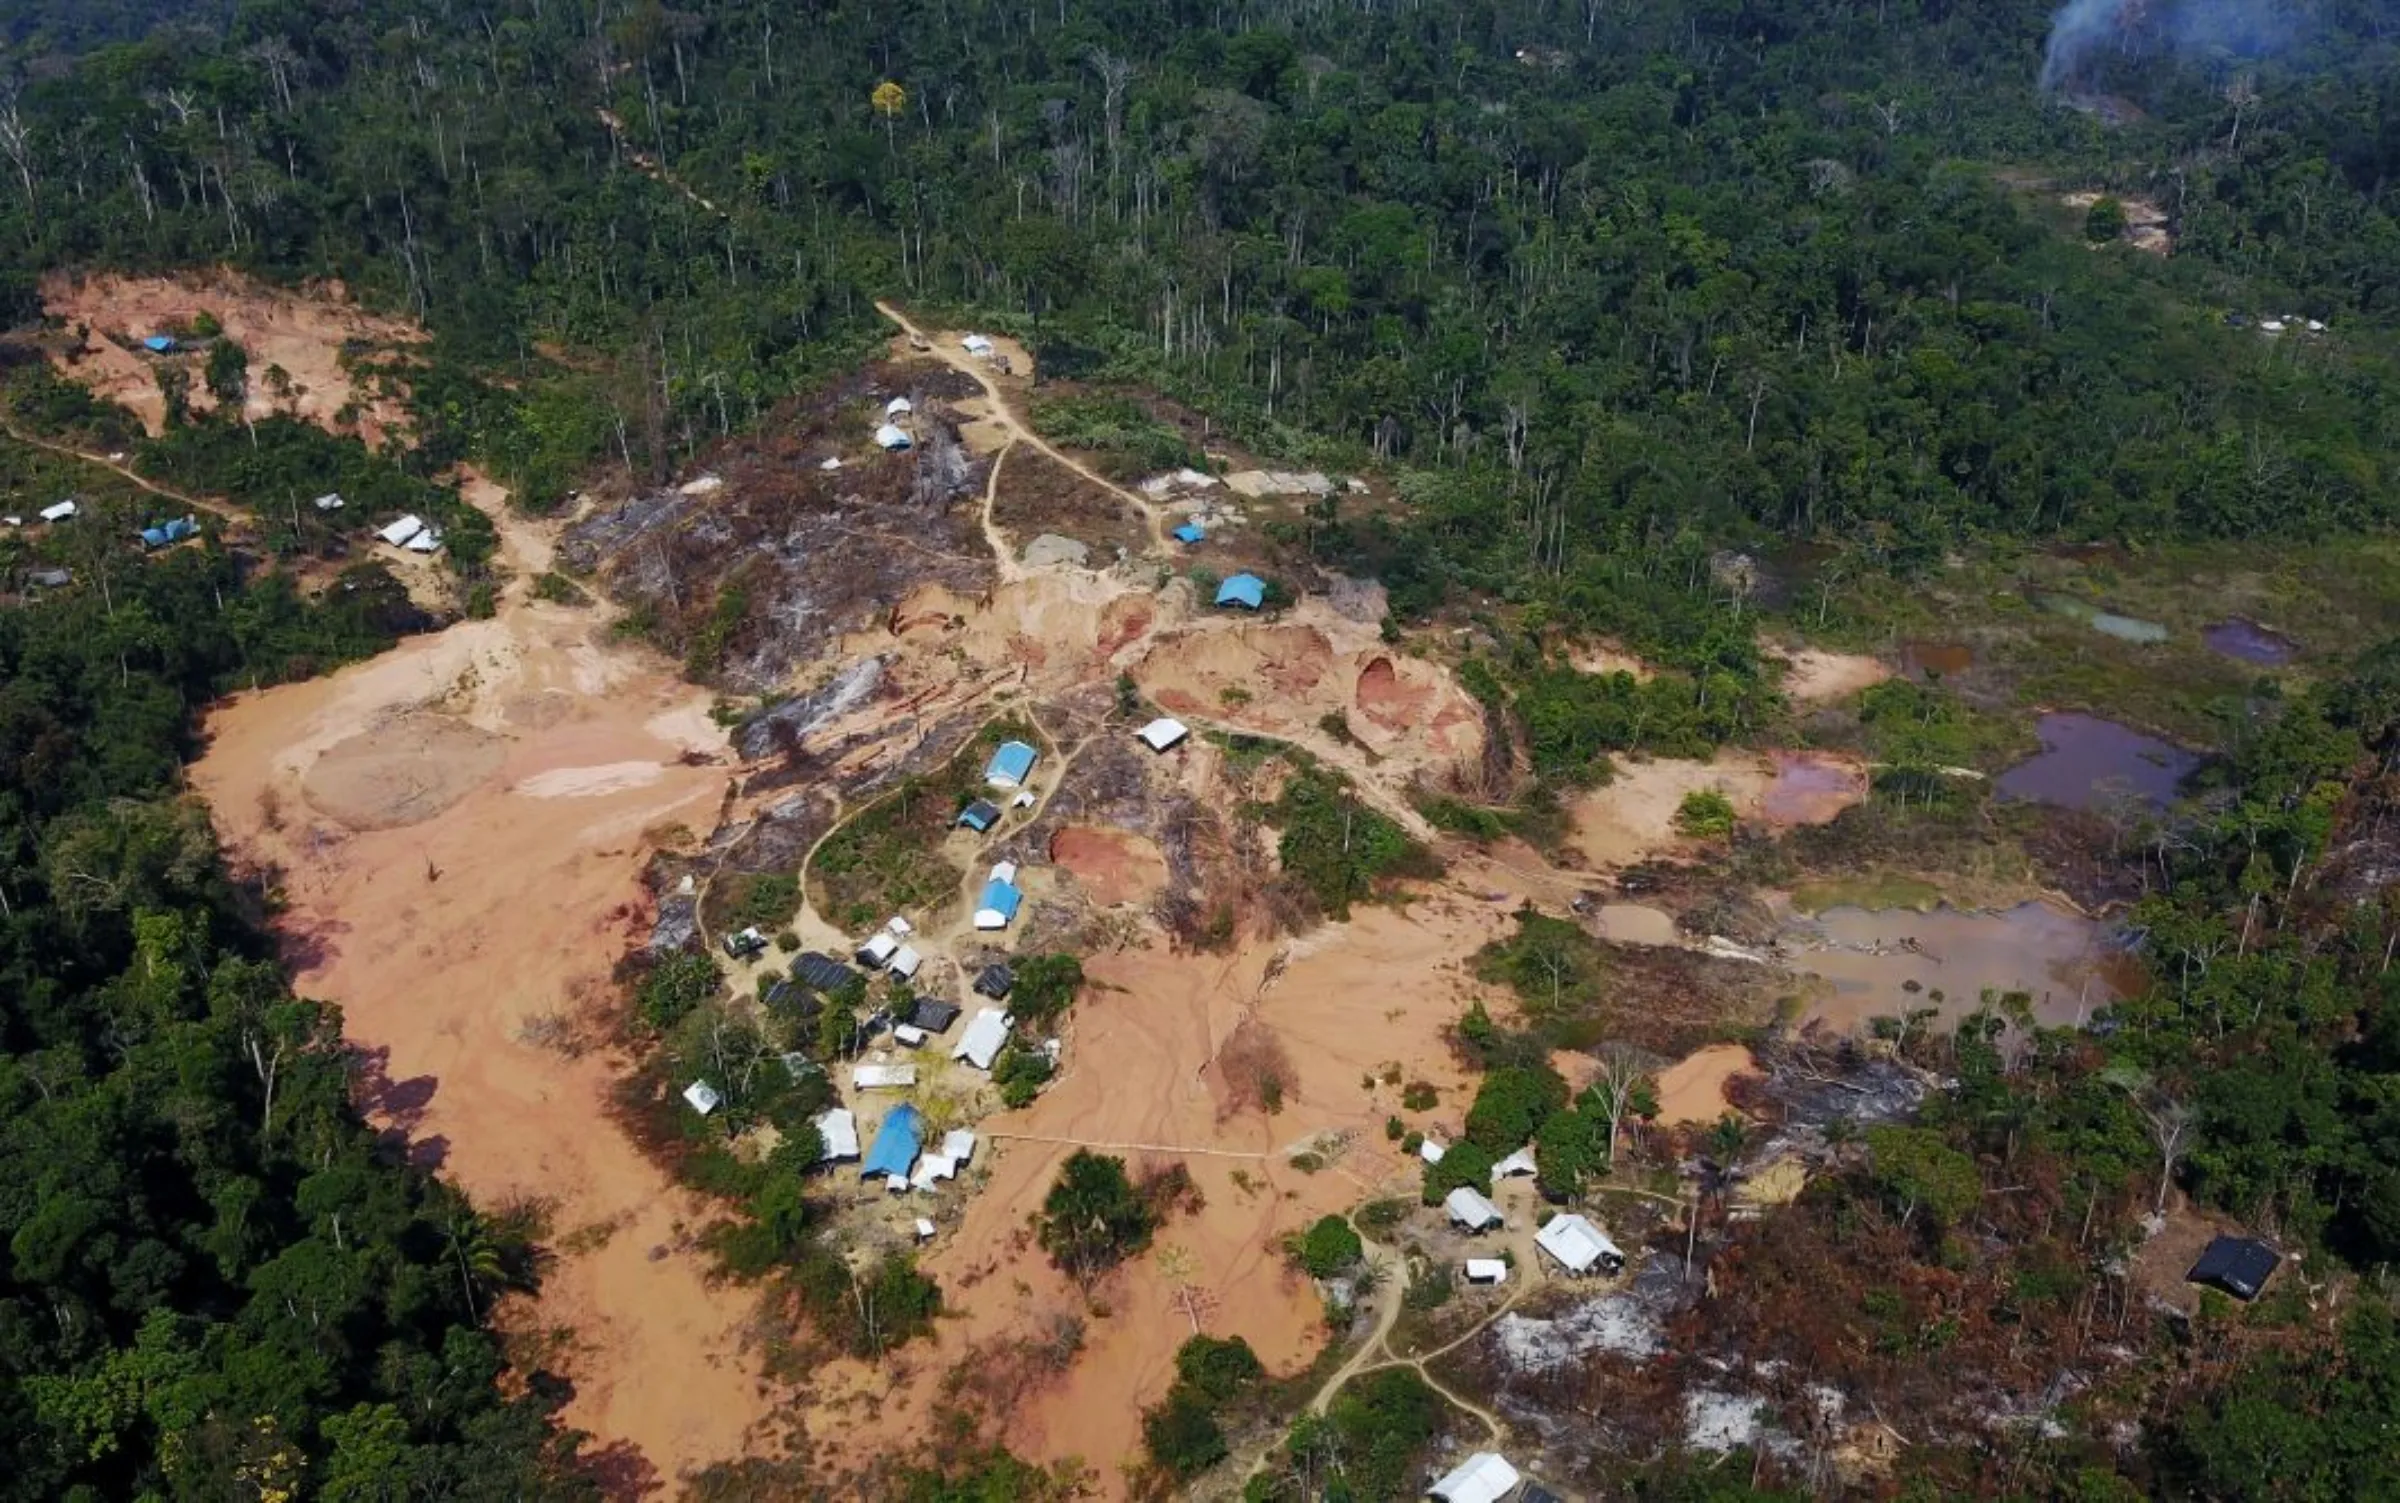 An aerial view show a wildcat gold mine, also known as a garimpo, at a deforested area of the Amazon rainforest near Crepurizao, in the municipality of Itaituba, Para State, Brazil, August 6, 2017. Picture taken with a drone